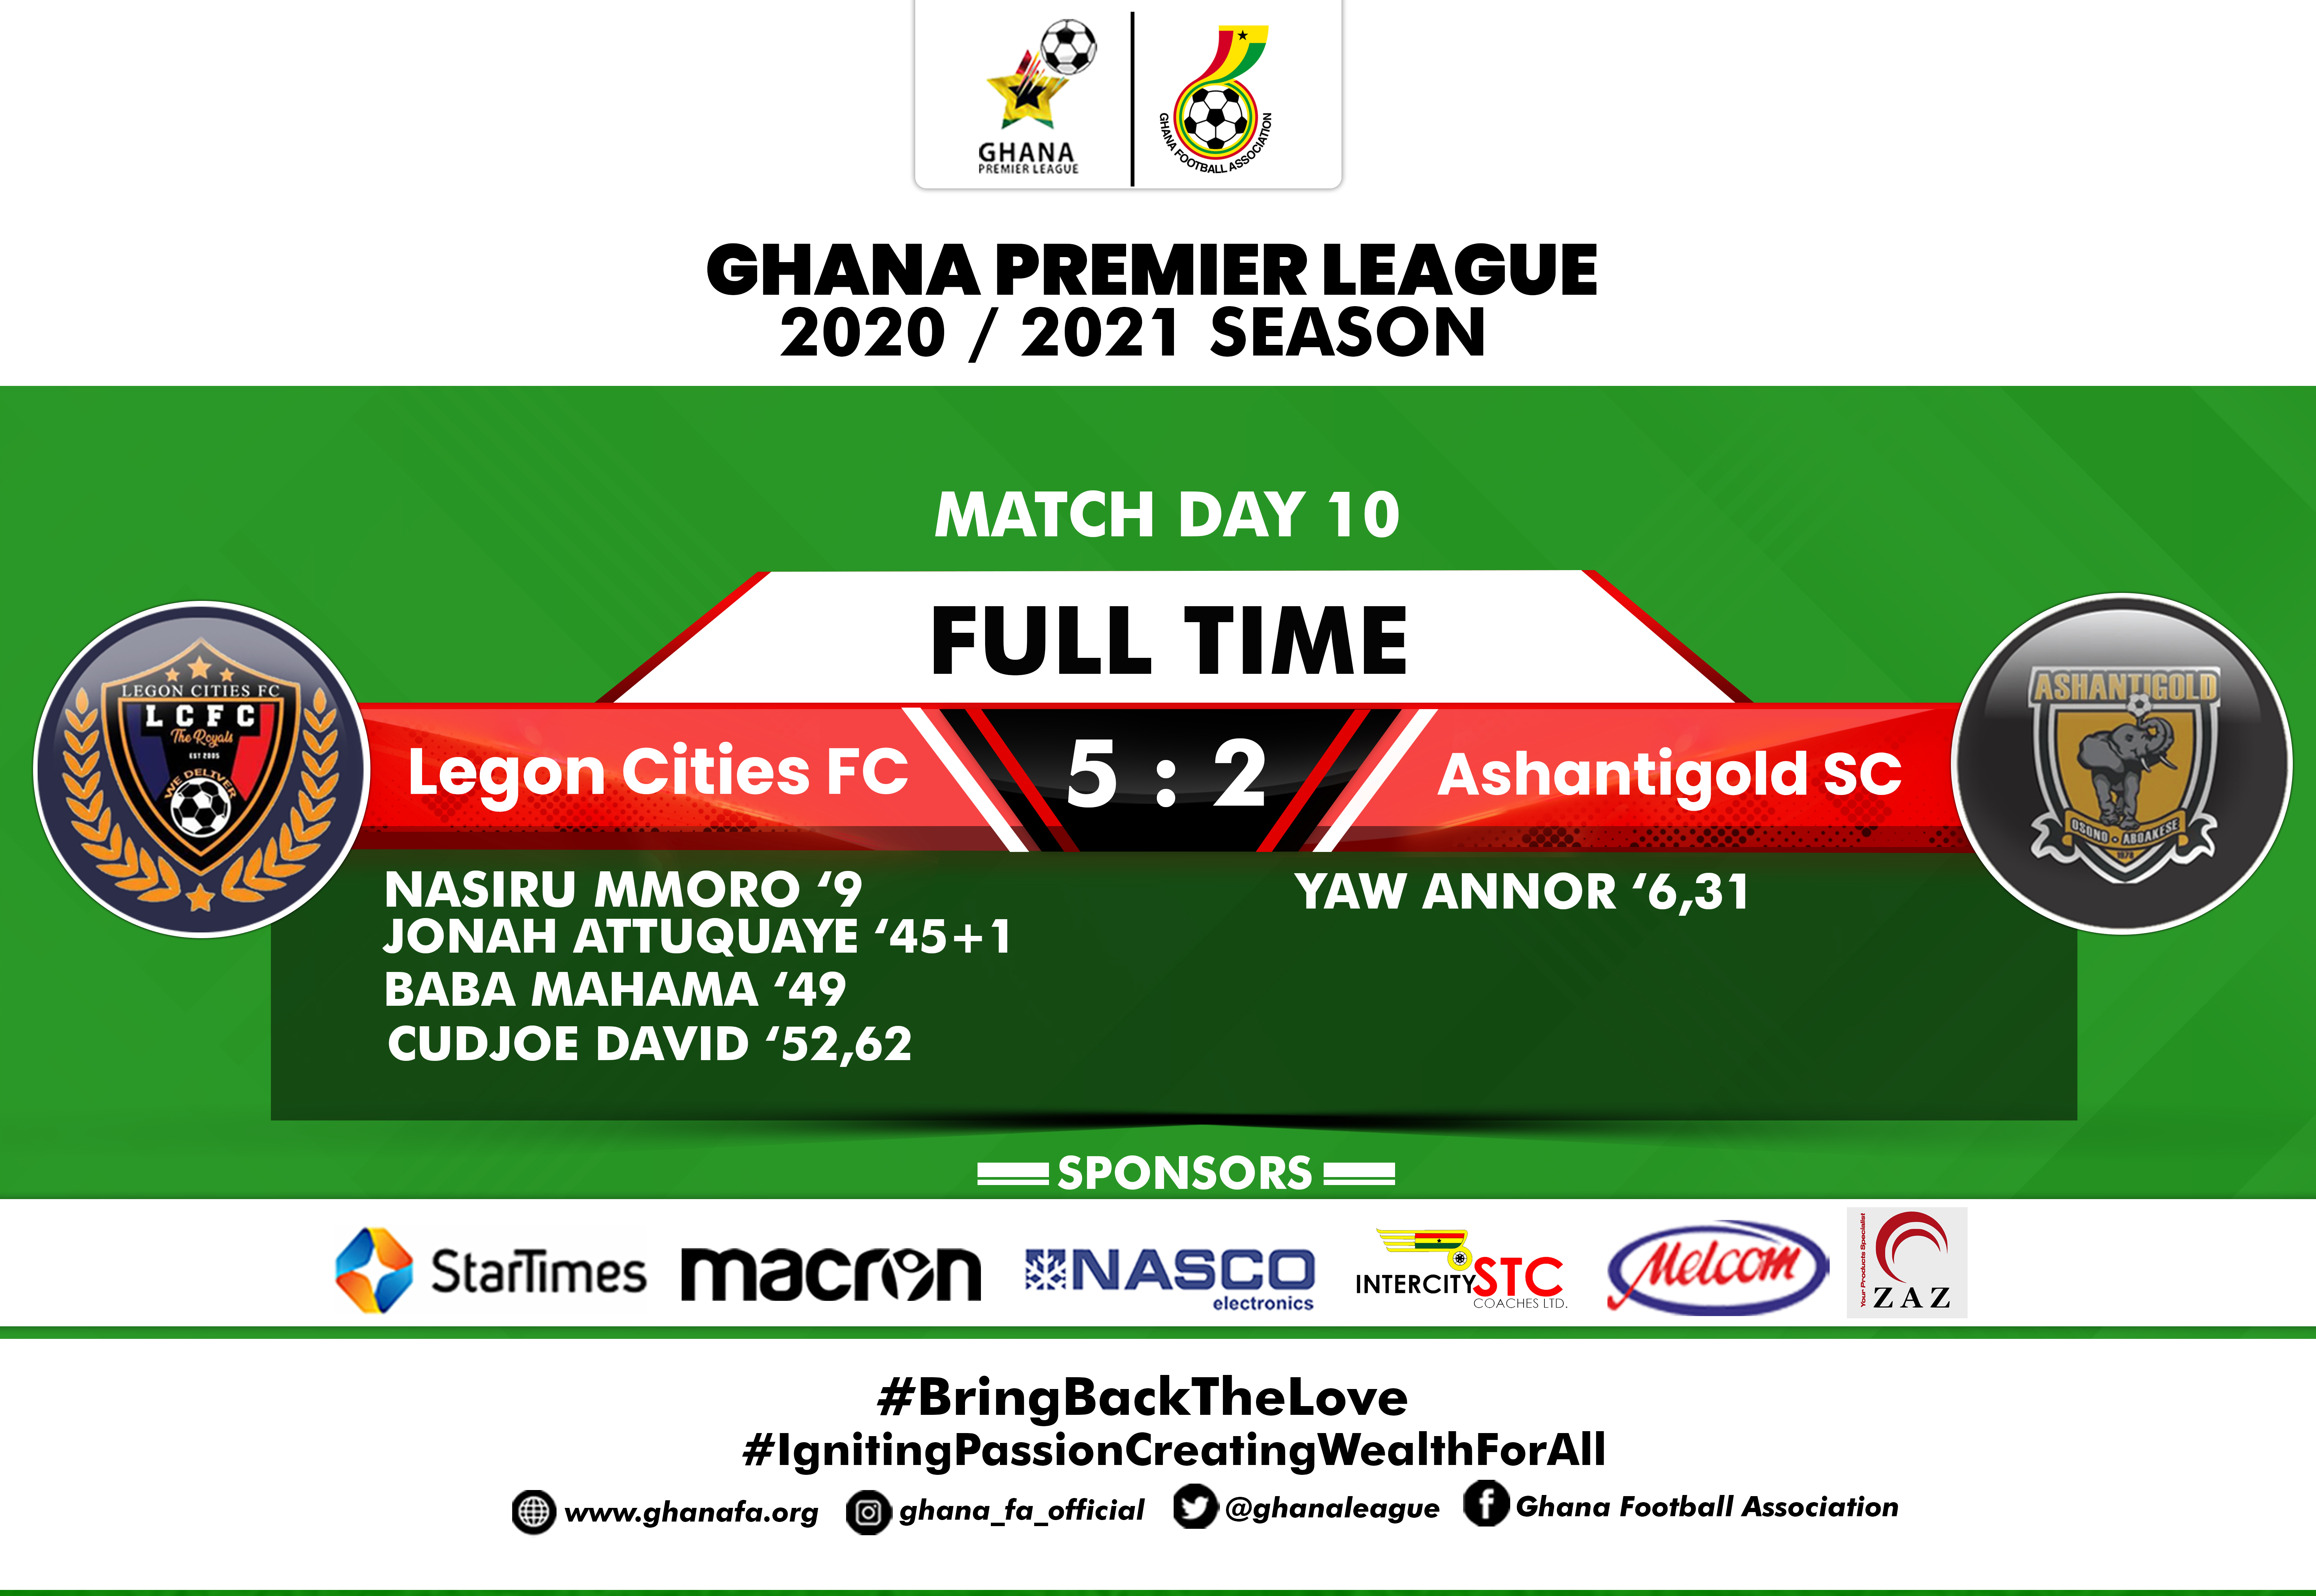 Ruthless Legon Cities beat AshantiGold to move out of relegation zone